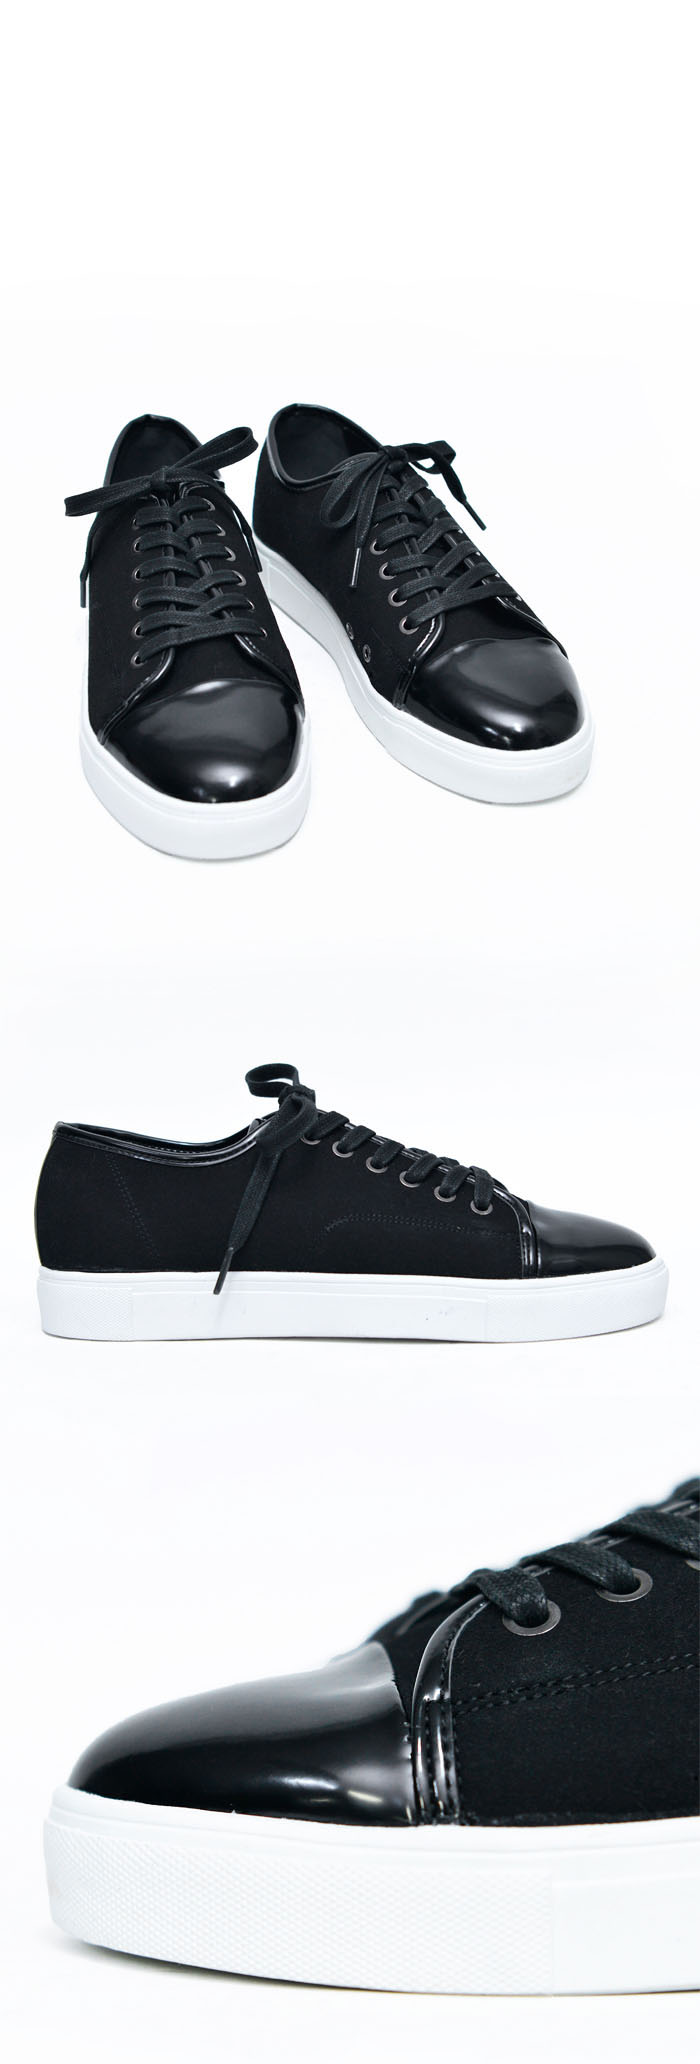 Shoes :: Contrast Toe Lace-up Suede Sneakers-Shoes 524 - GUYLOOK Men's ...